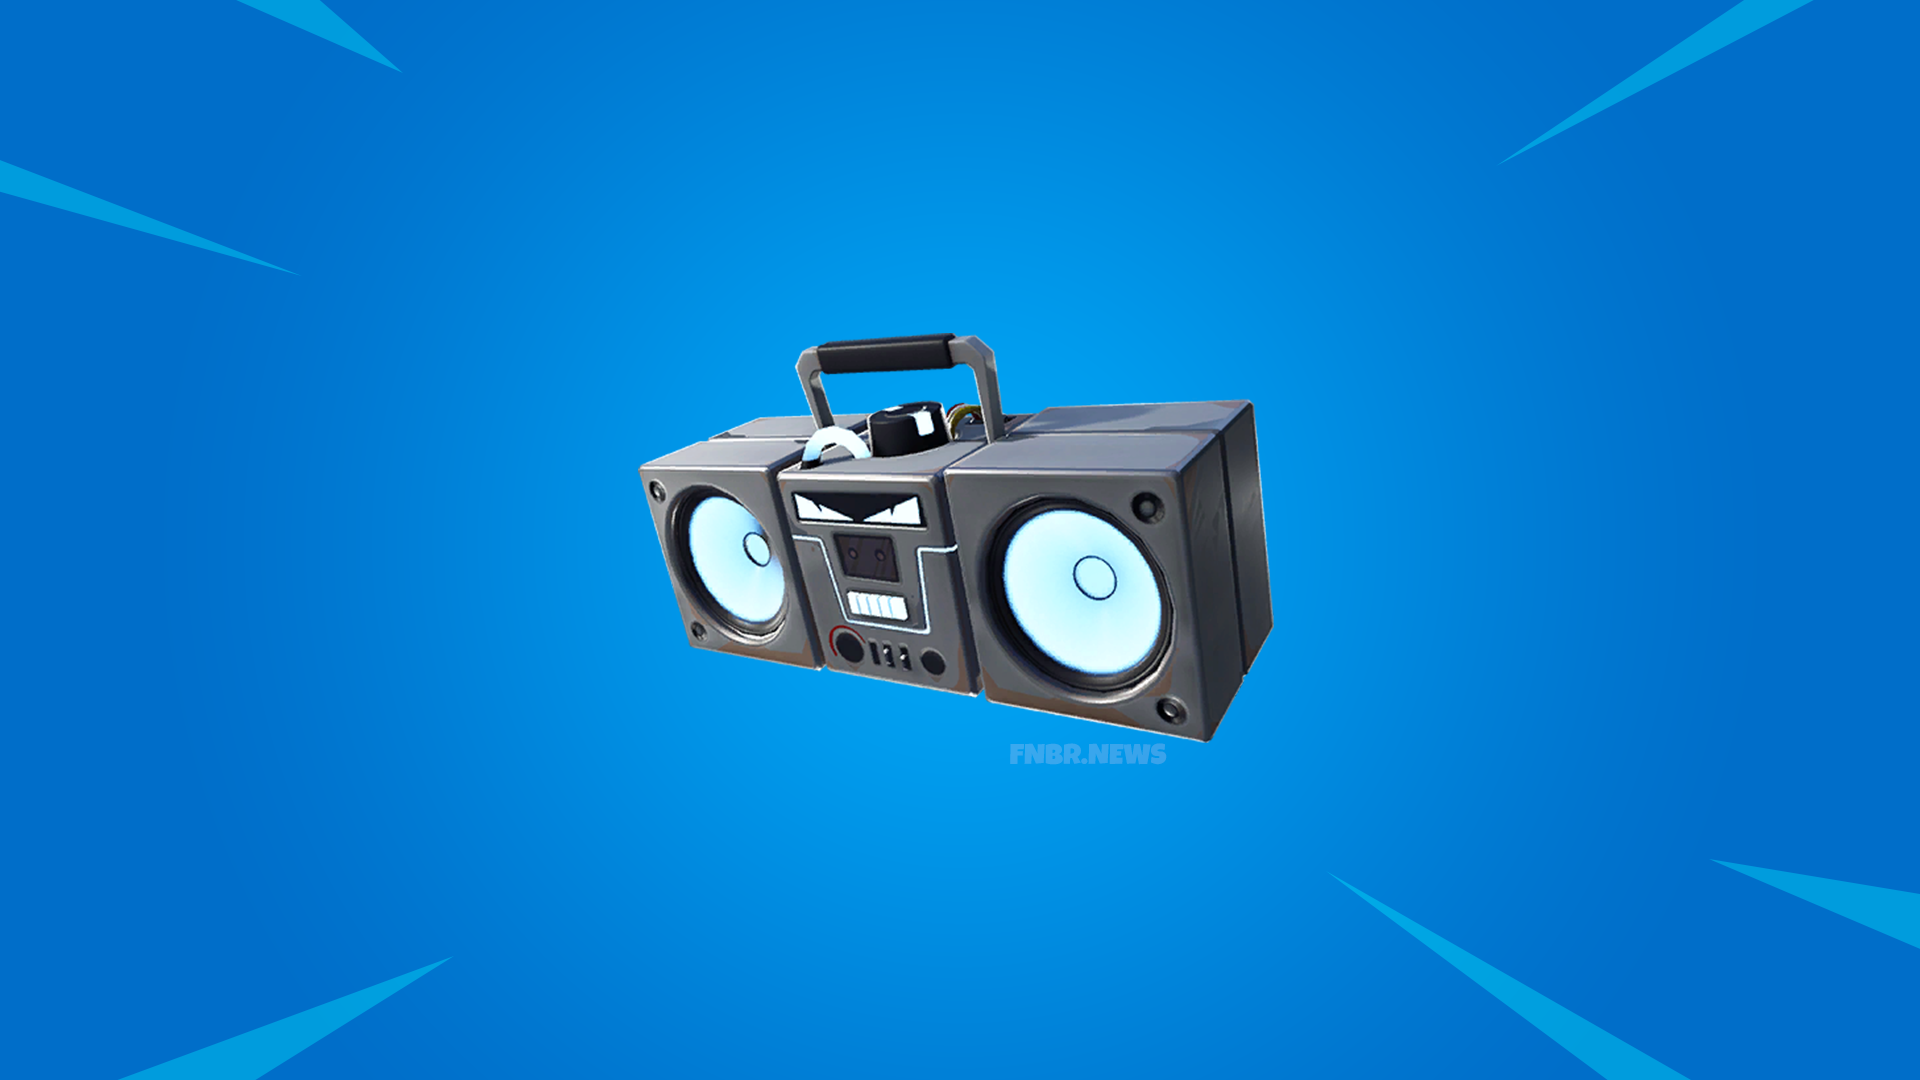 Leak: Carrot Consumable and Boombox Item Coming Soon to Fortnite